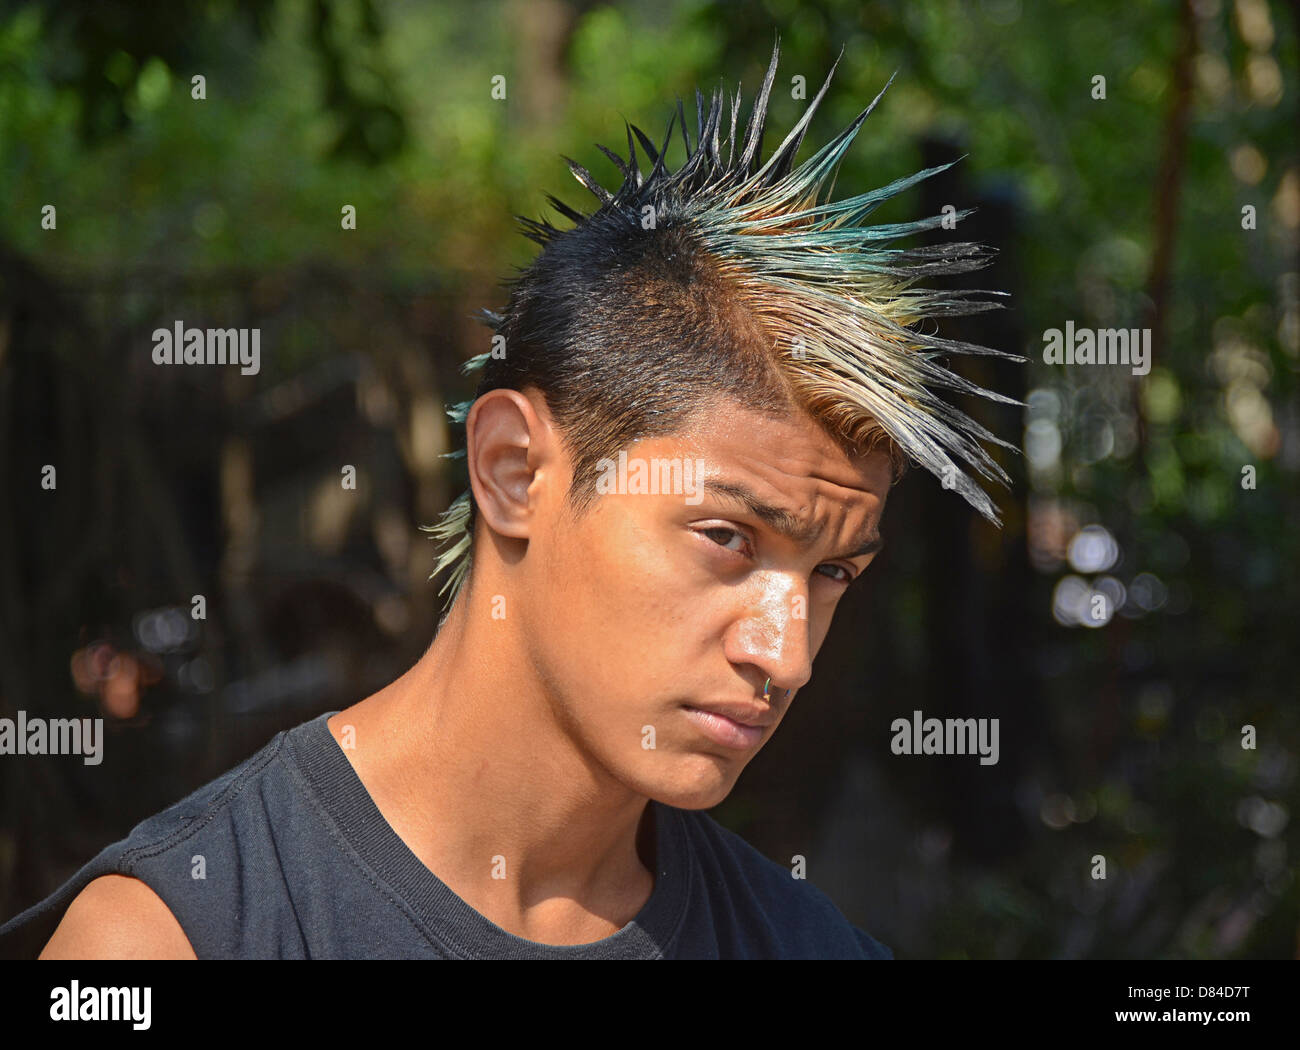 A young man with a Mohawk hairdo and a nose ring in Union Square Park, New York City Stock Photo